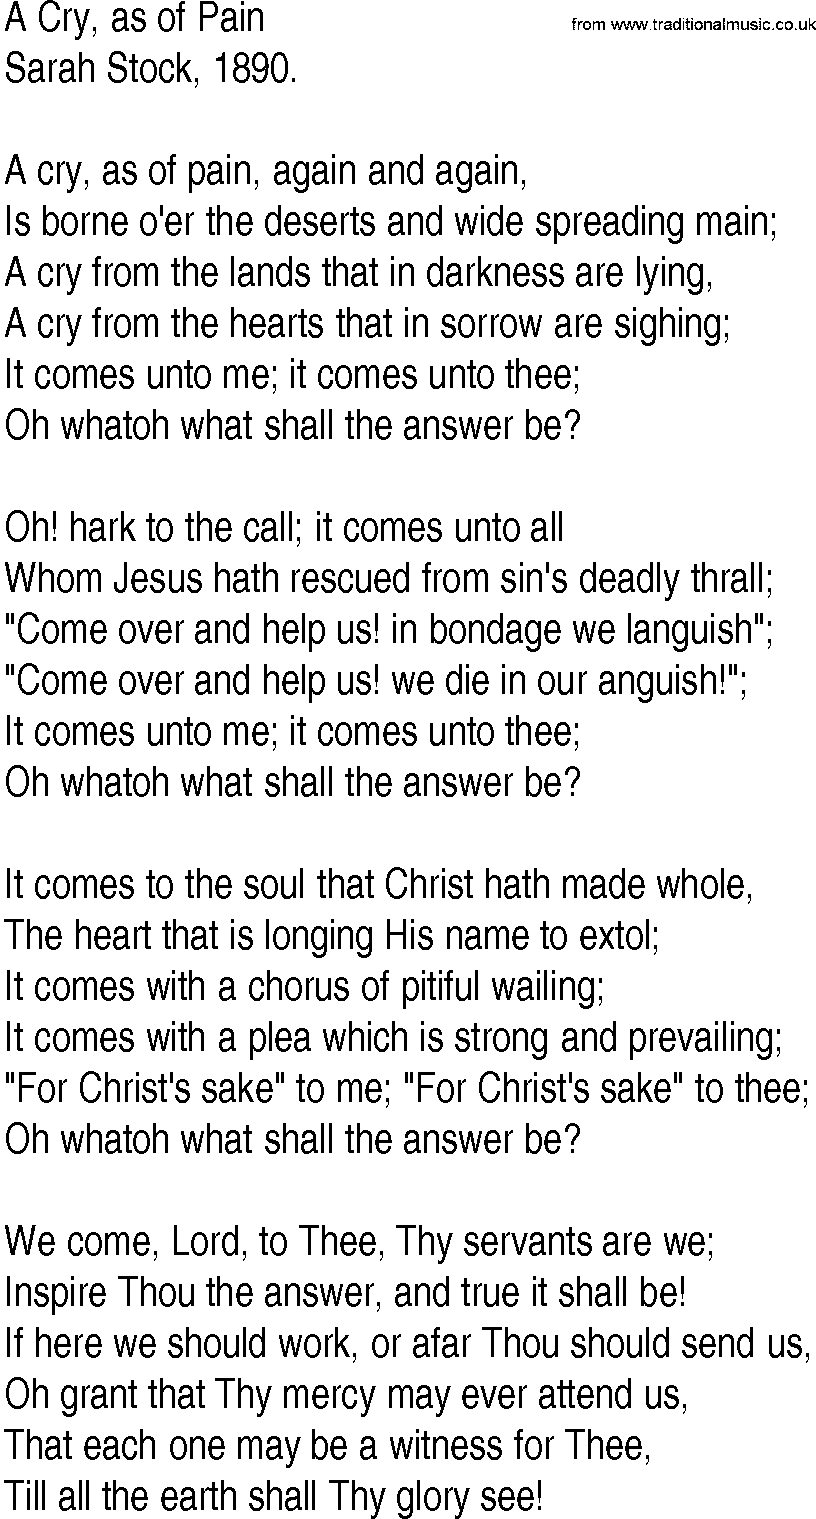 Hymn and Gospel Song: A Cry, as of Pain by Sarah Stock lyrics